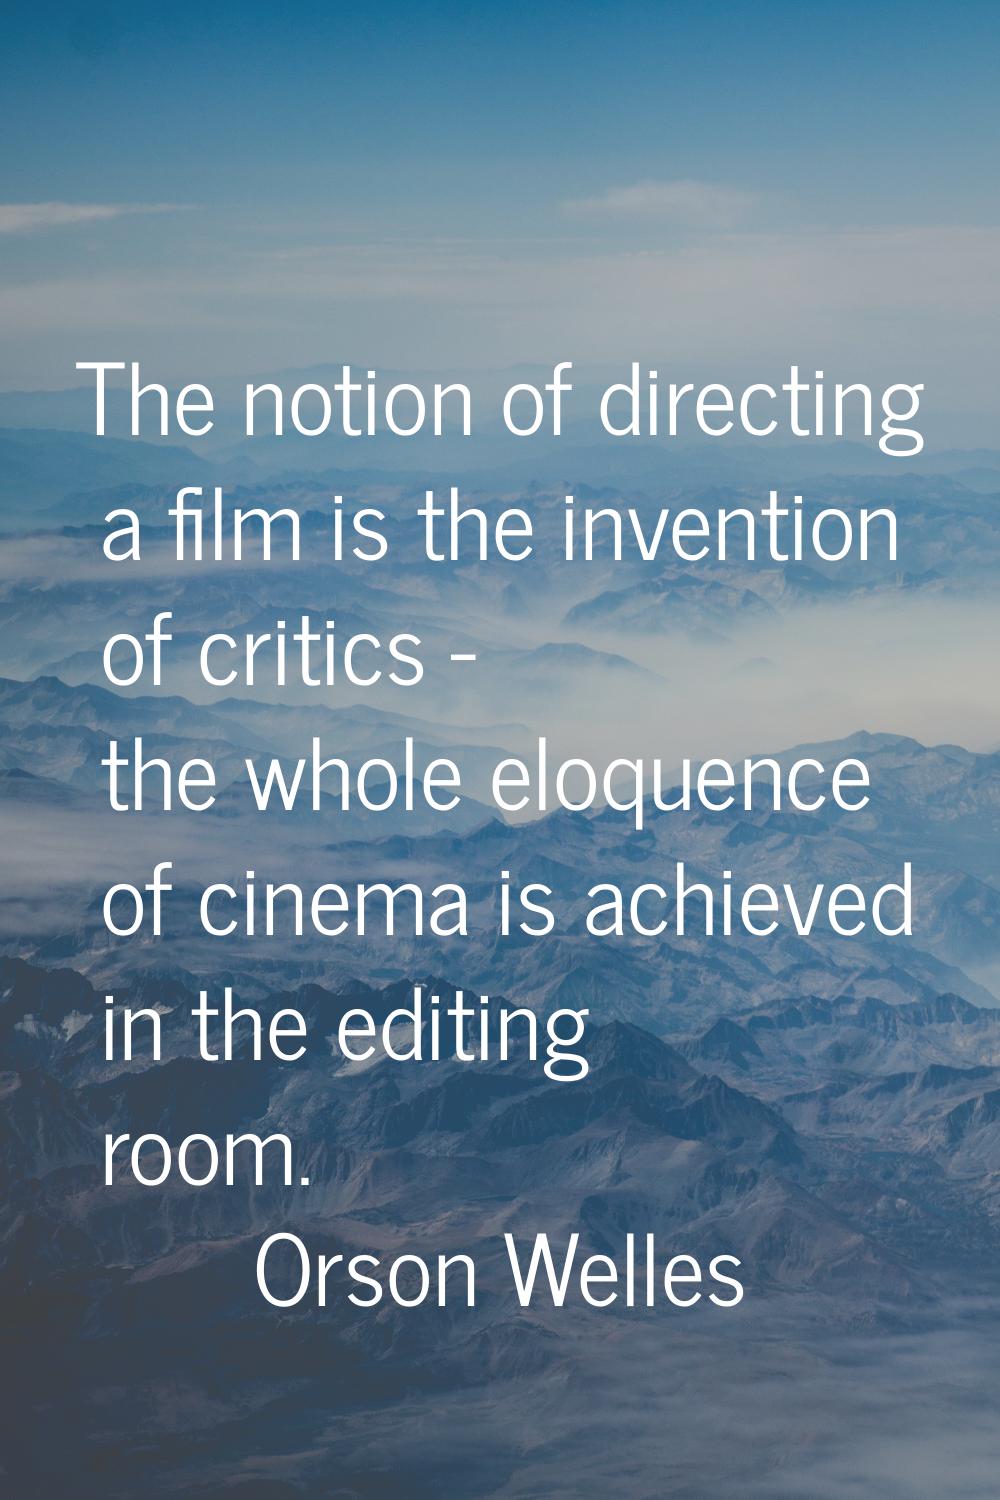 The notion of directing a film is the invention of critics - the whole eloquence of cinema is achie